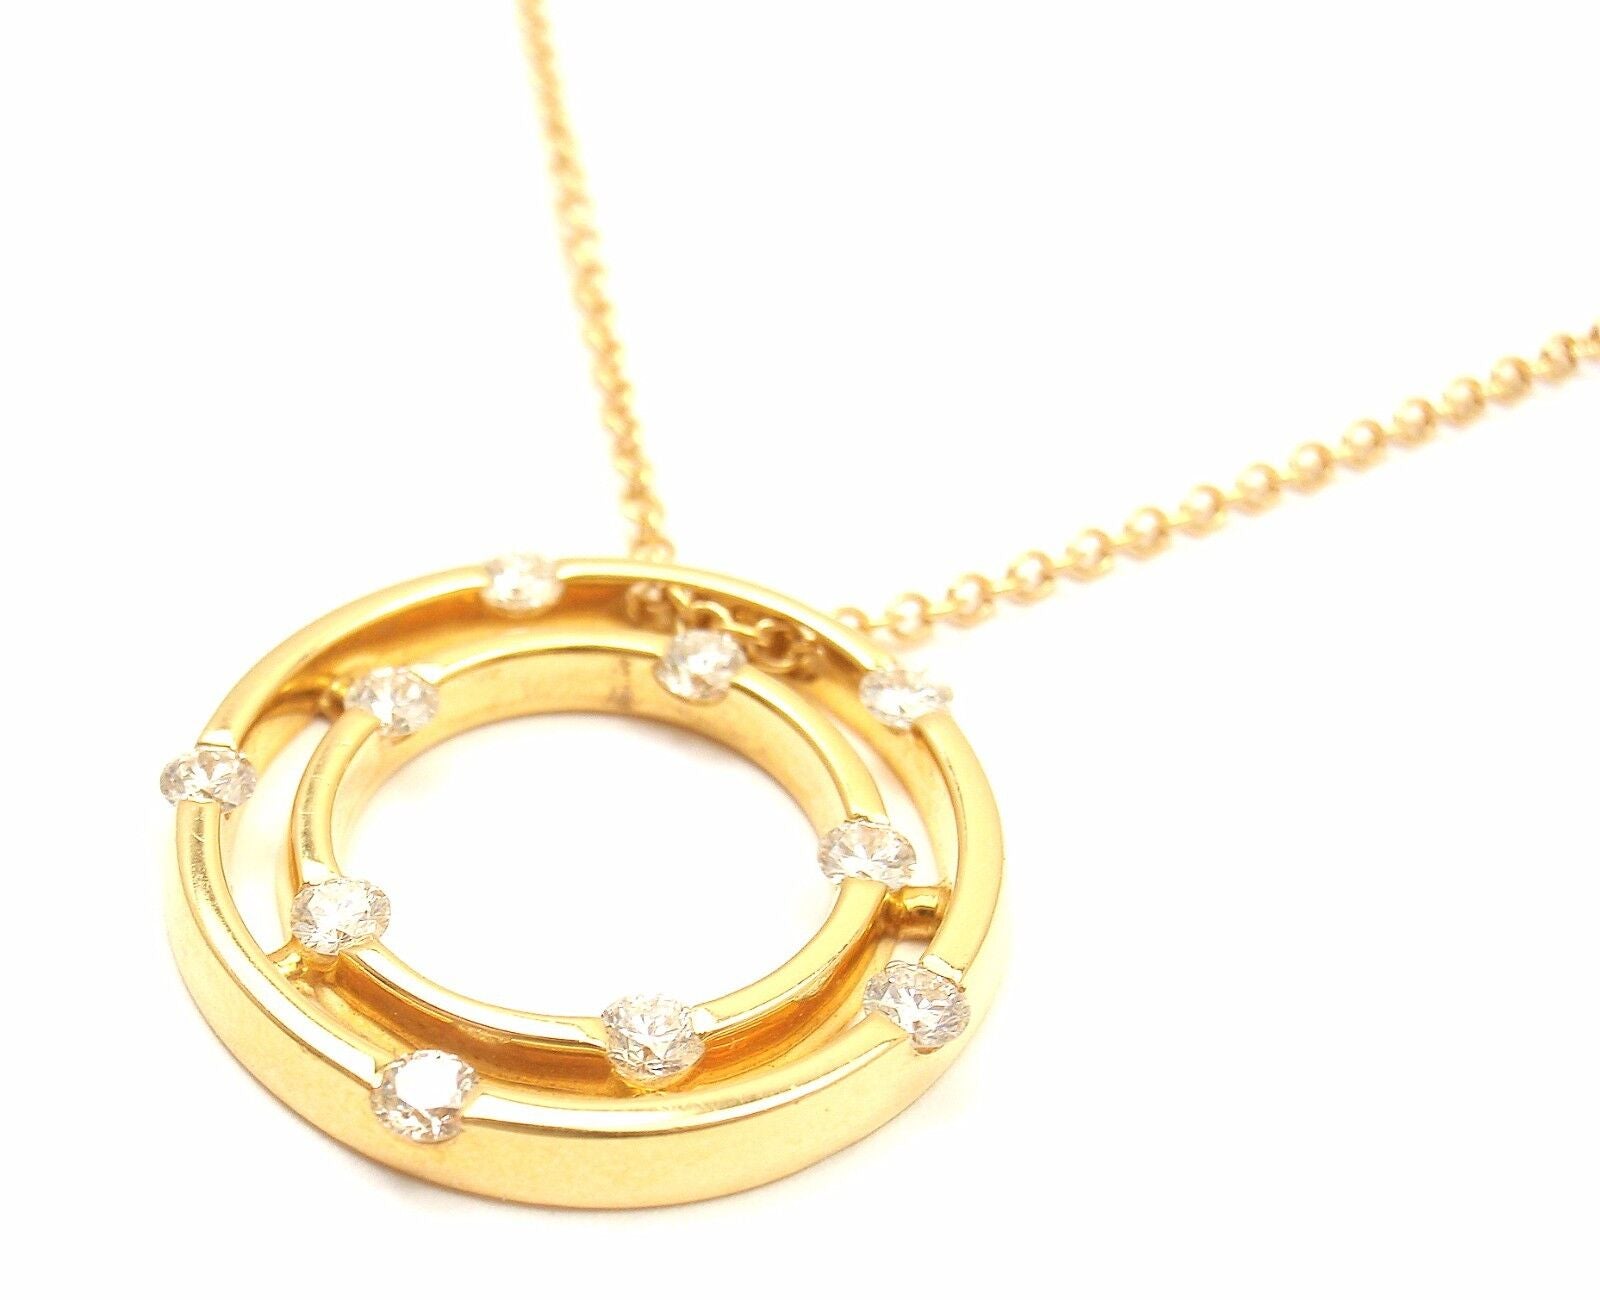 Roberto Coin Jewelry & Watches:Fine Jewelry:Necklaces & Pendants ROBERTO COIN 18K YELLOW GOLD DOUBLE HOOP DIAMOND PENDANT NECKLACE